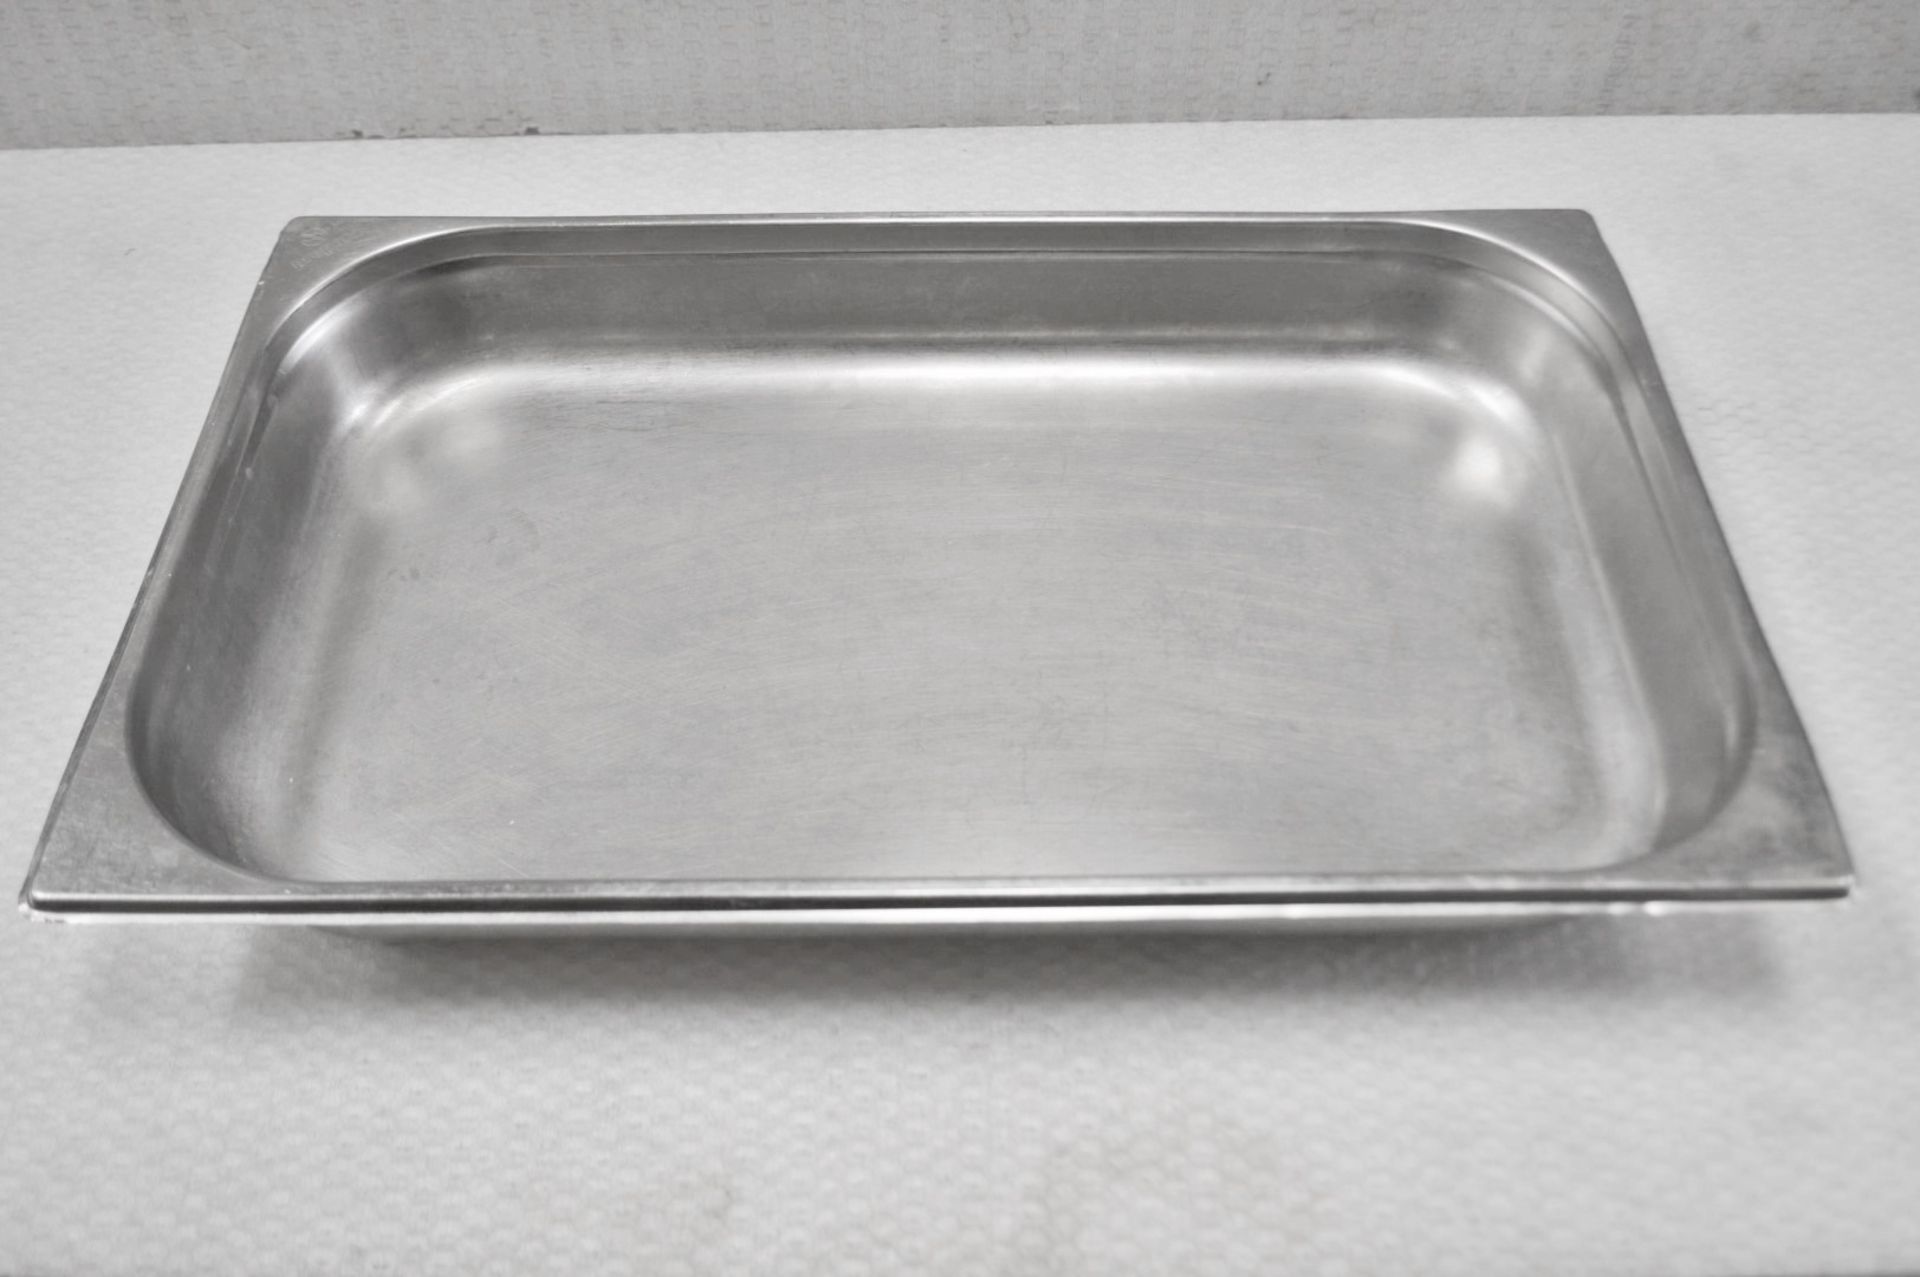 10 x Stainless Steel Gastronorm Trays - Dimensions: L53 x W32 cm - Recently Removed From a